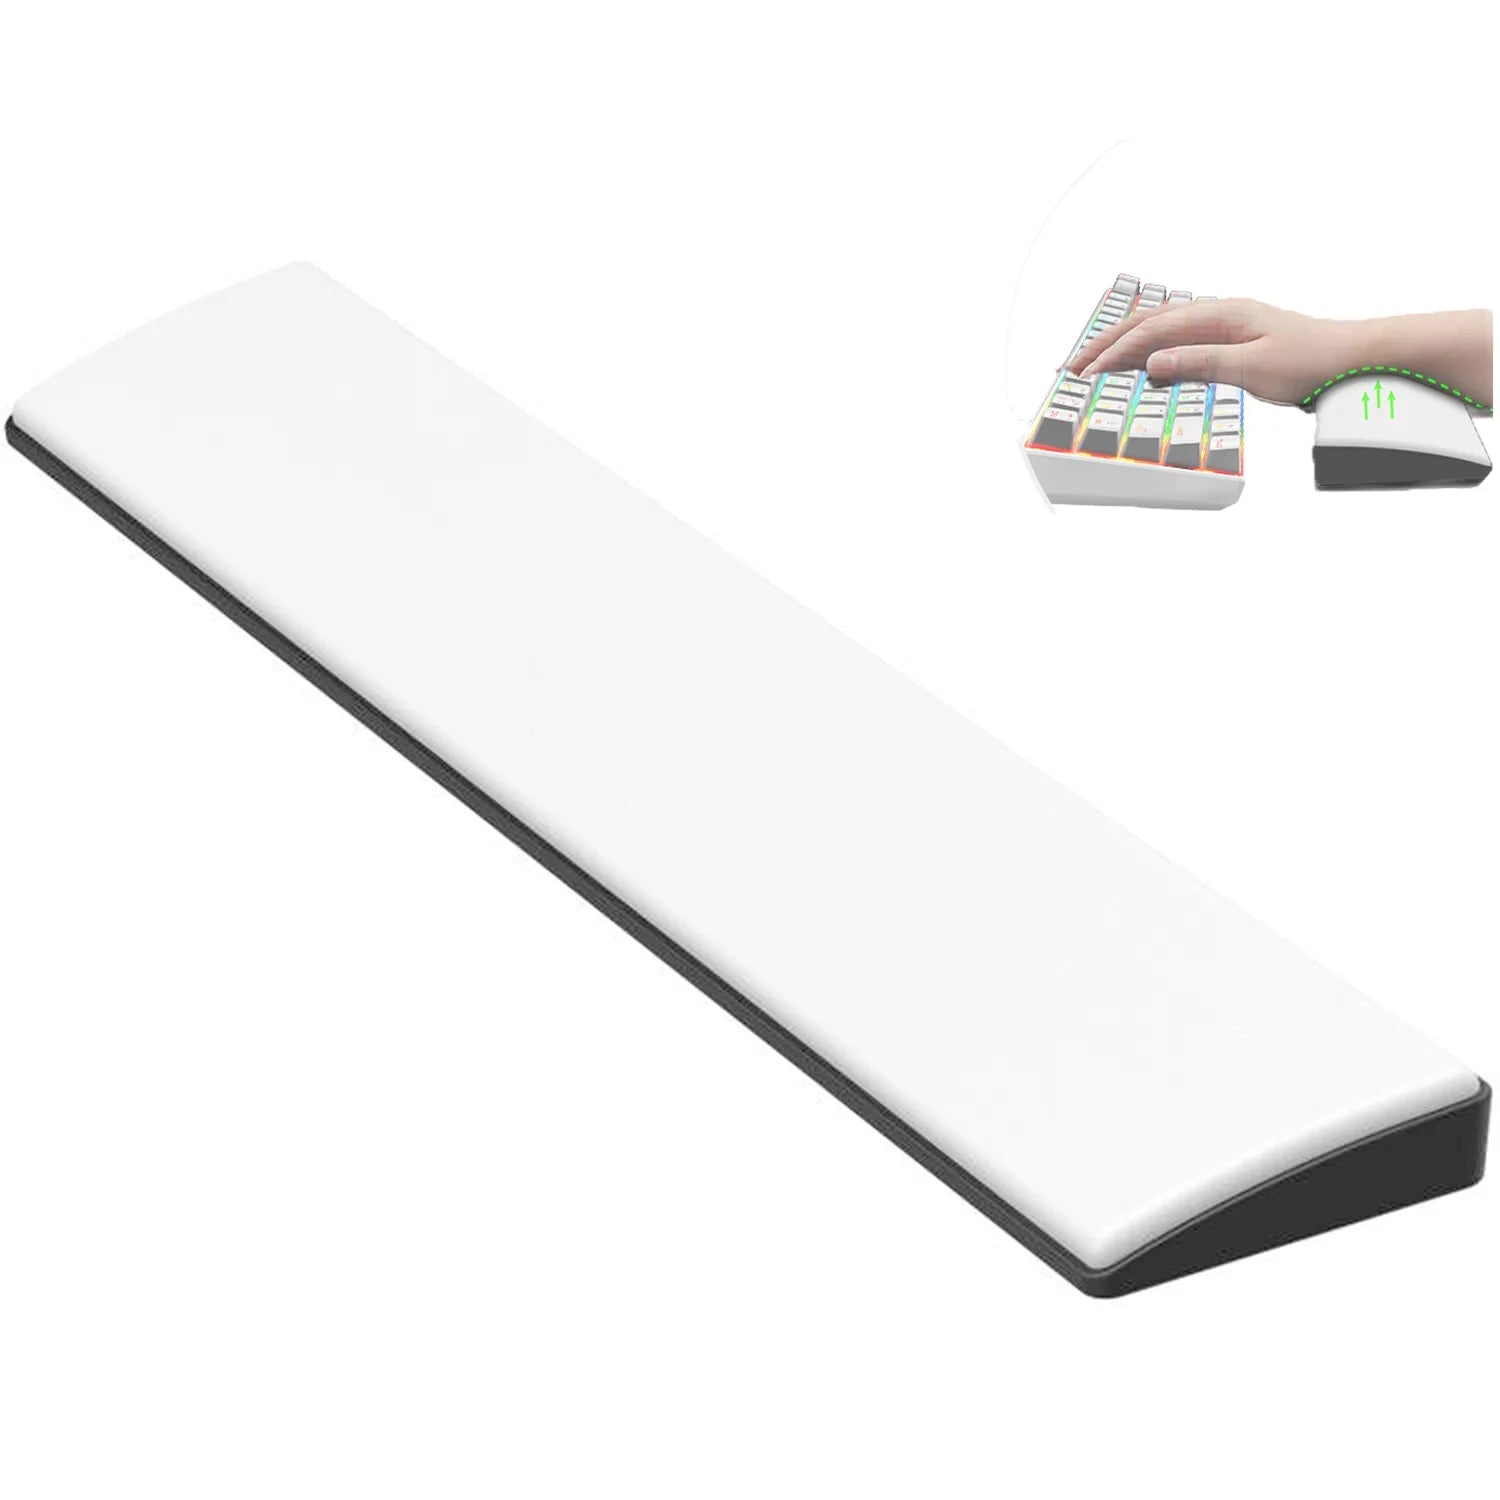 Ajazz Wrist pad white 61key - I Gaming Computer | Australia Wide Shipping | Buy now, Pay Later with Afterpay, Klarna, Zip, Latitude & Paypal